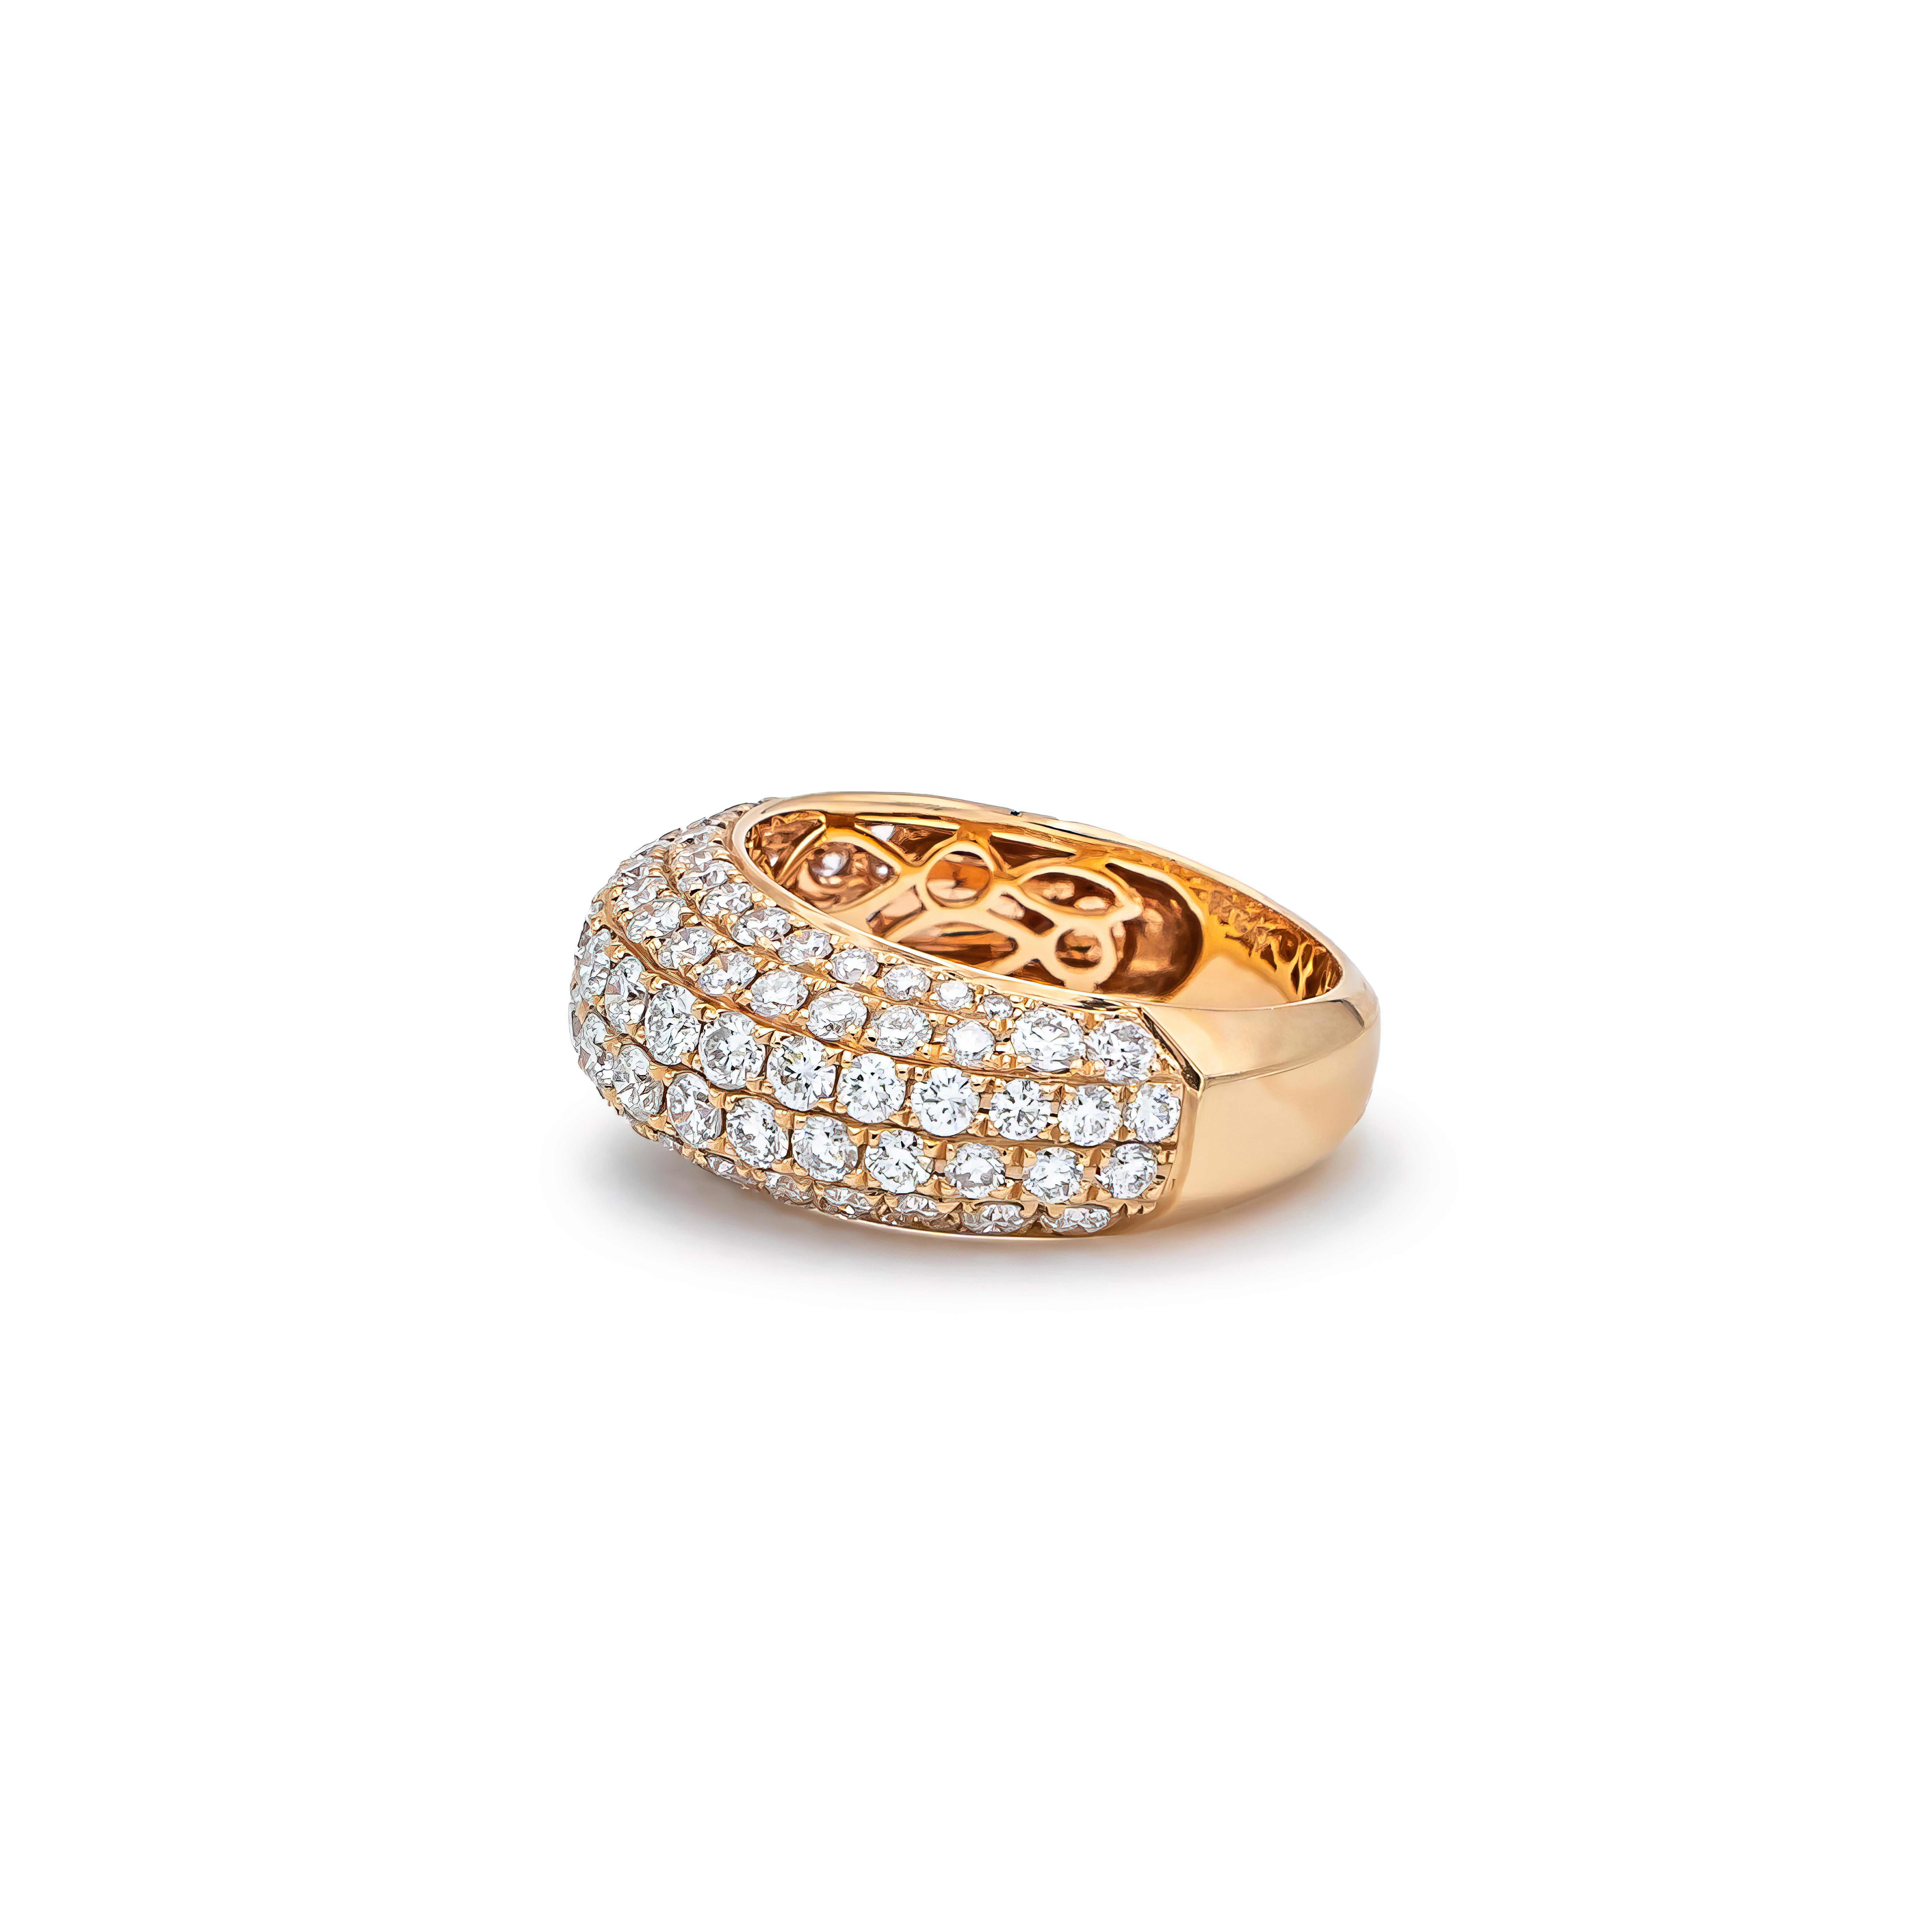 Total Ring Carat Weight: 2.26cts
Diamond Clarity: VS1
Diamond Color: G
Gold Purity: 18k
Gold Color: Rose
Gold Weight: 5.49g
Diamond Type: Natural Diamond, Conflict-Free

Diamonds Set in Orbit Micro Pave 18k Gold Cocktail Ring
This piece has been